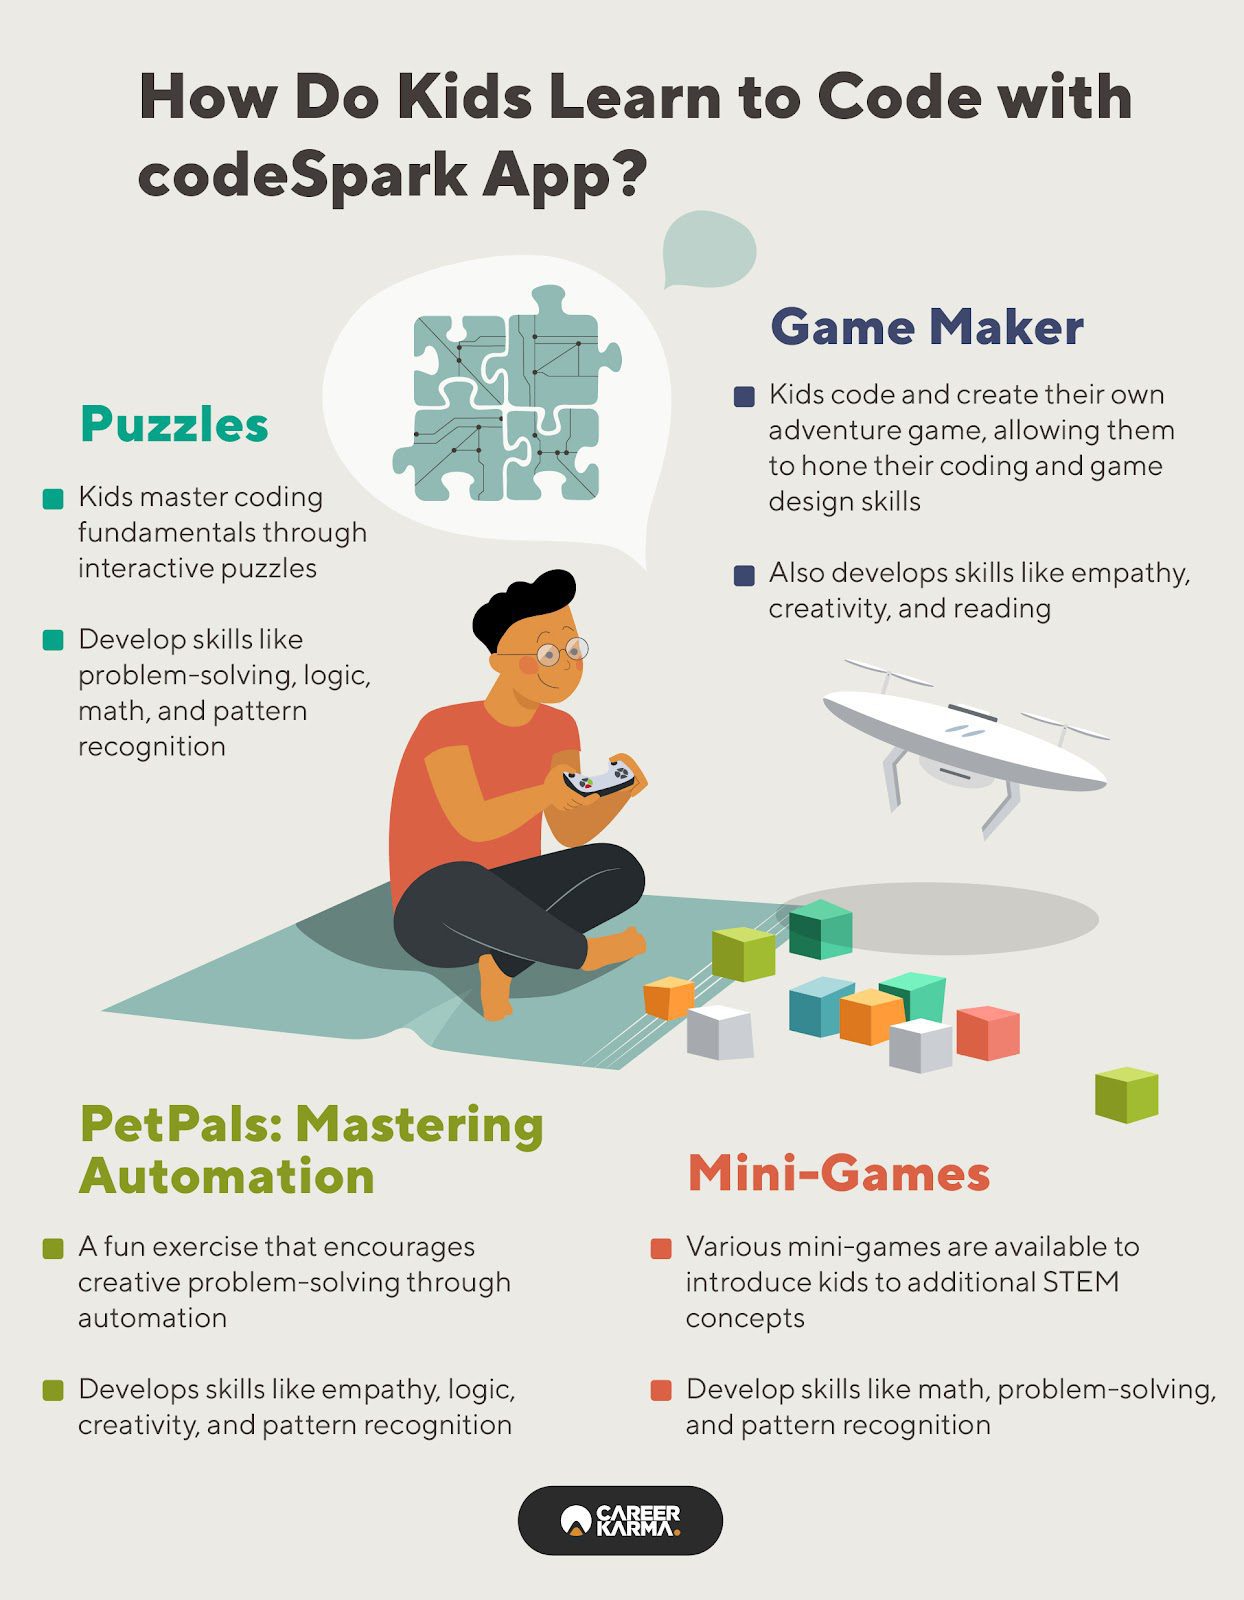 An infographic highlighting how users can learn to code with the codeSpark app